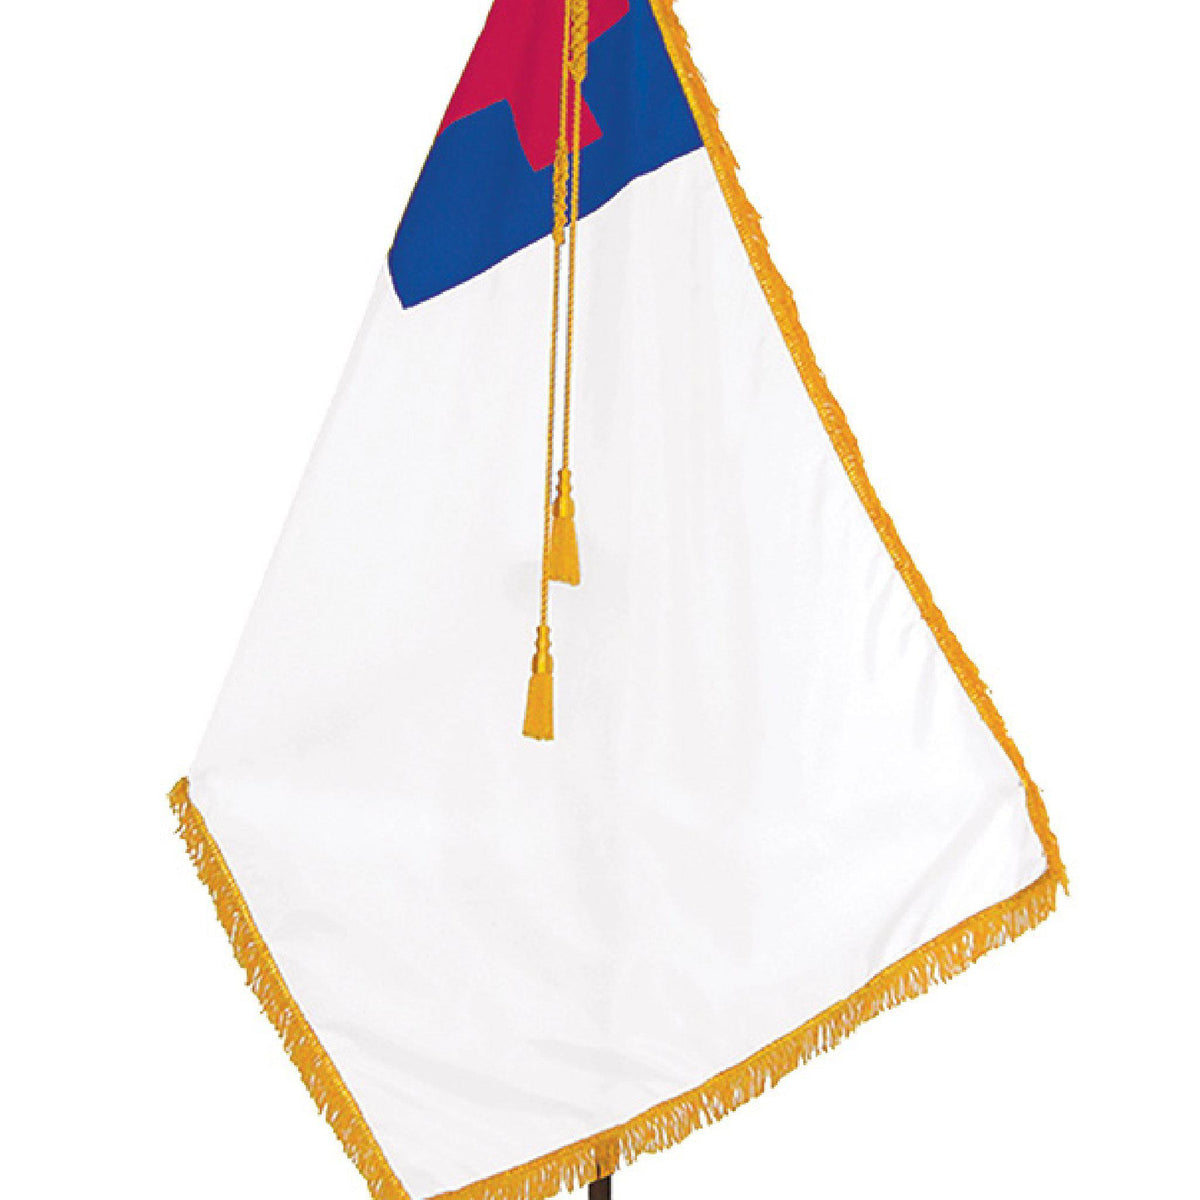 9' Gold Cord with 6" Tassels shown on indoor Christian Flag display